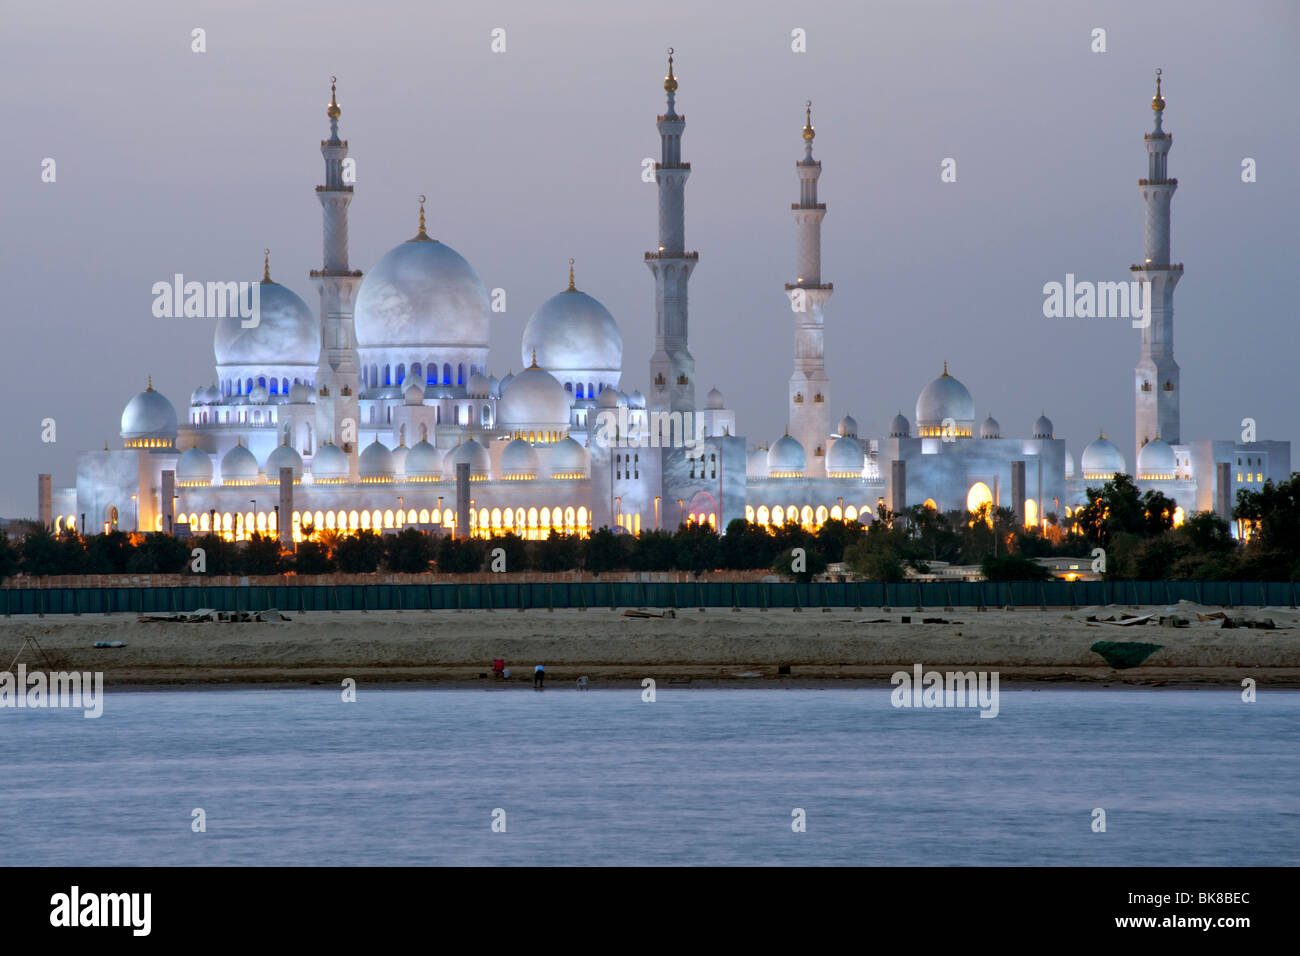 Dusk view of the Sheikh Zayed Grand Mosque in Abu Dhabi, capital of the United Arab Emirates. Stock Photo